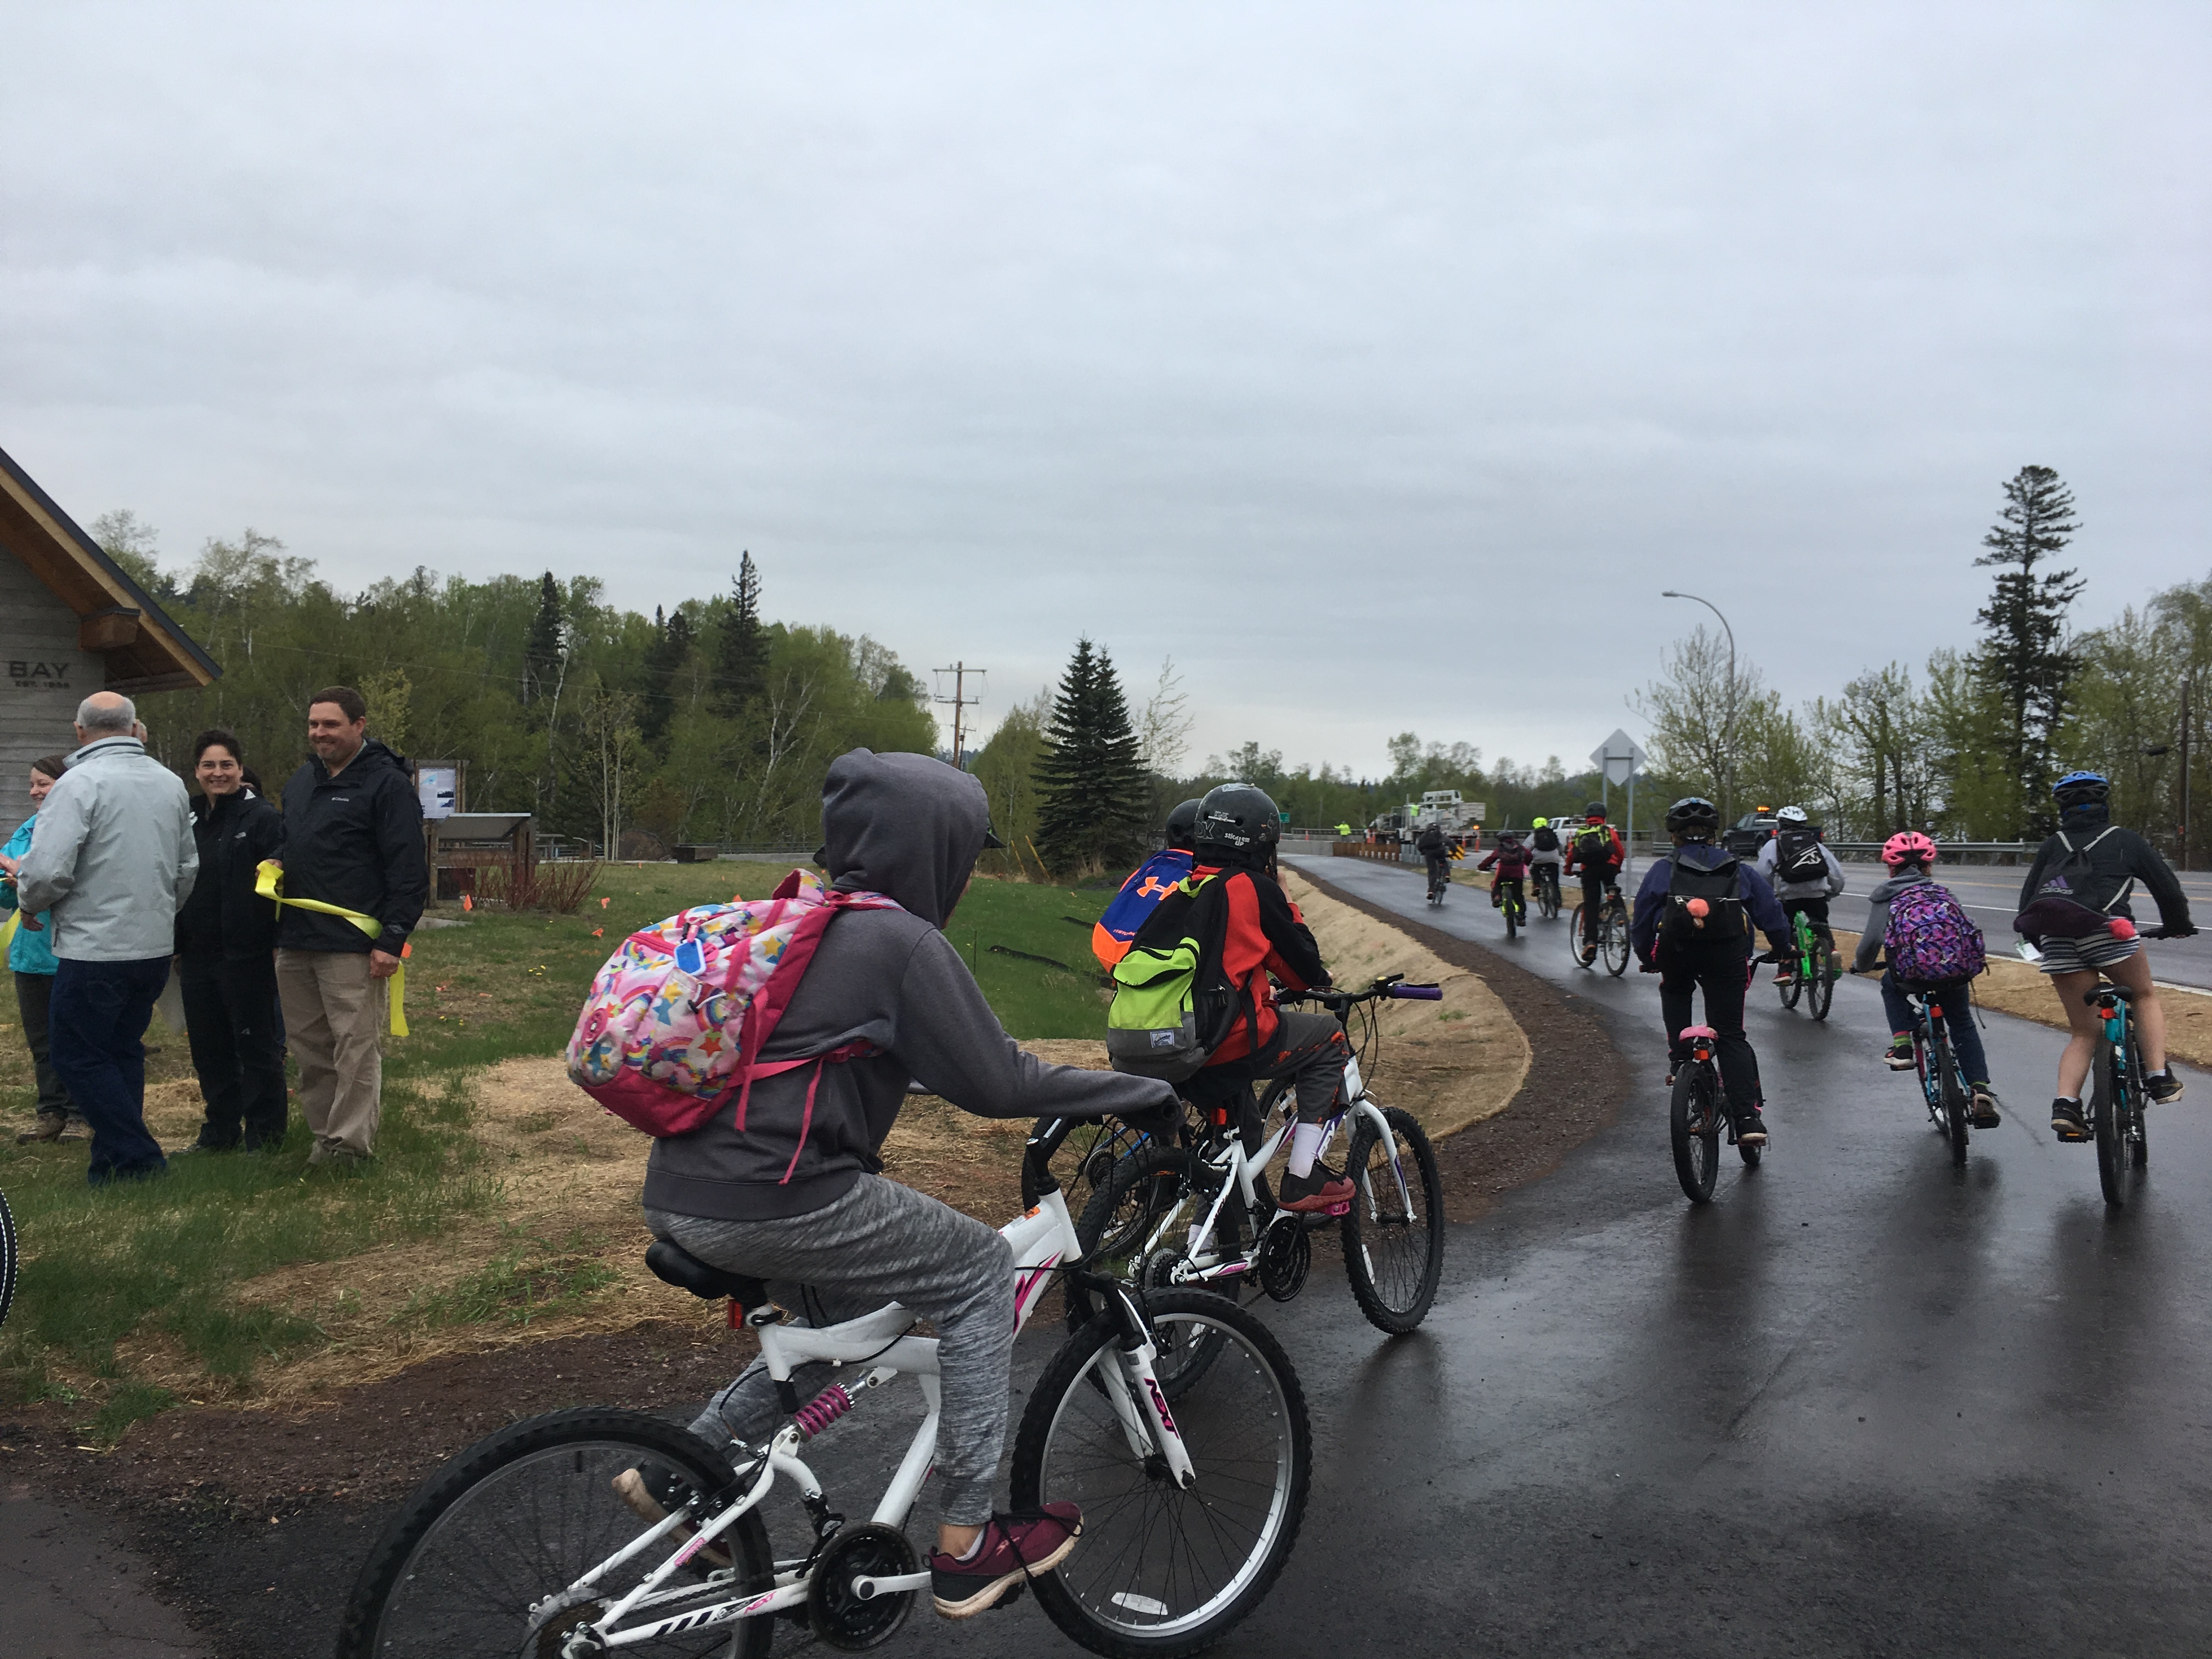 Kids take off by bike on the newly opened paved trail